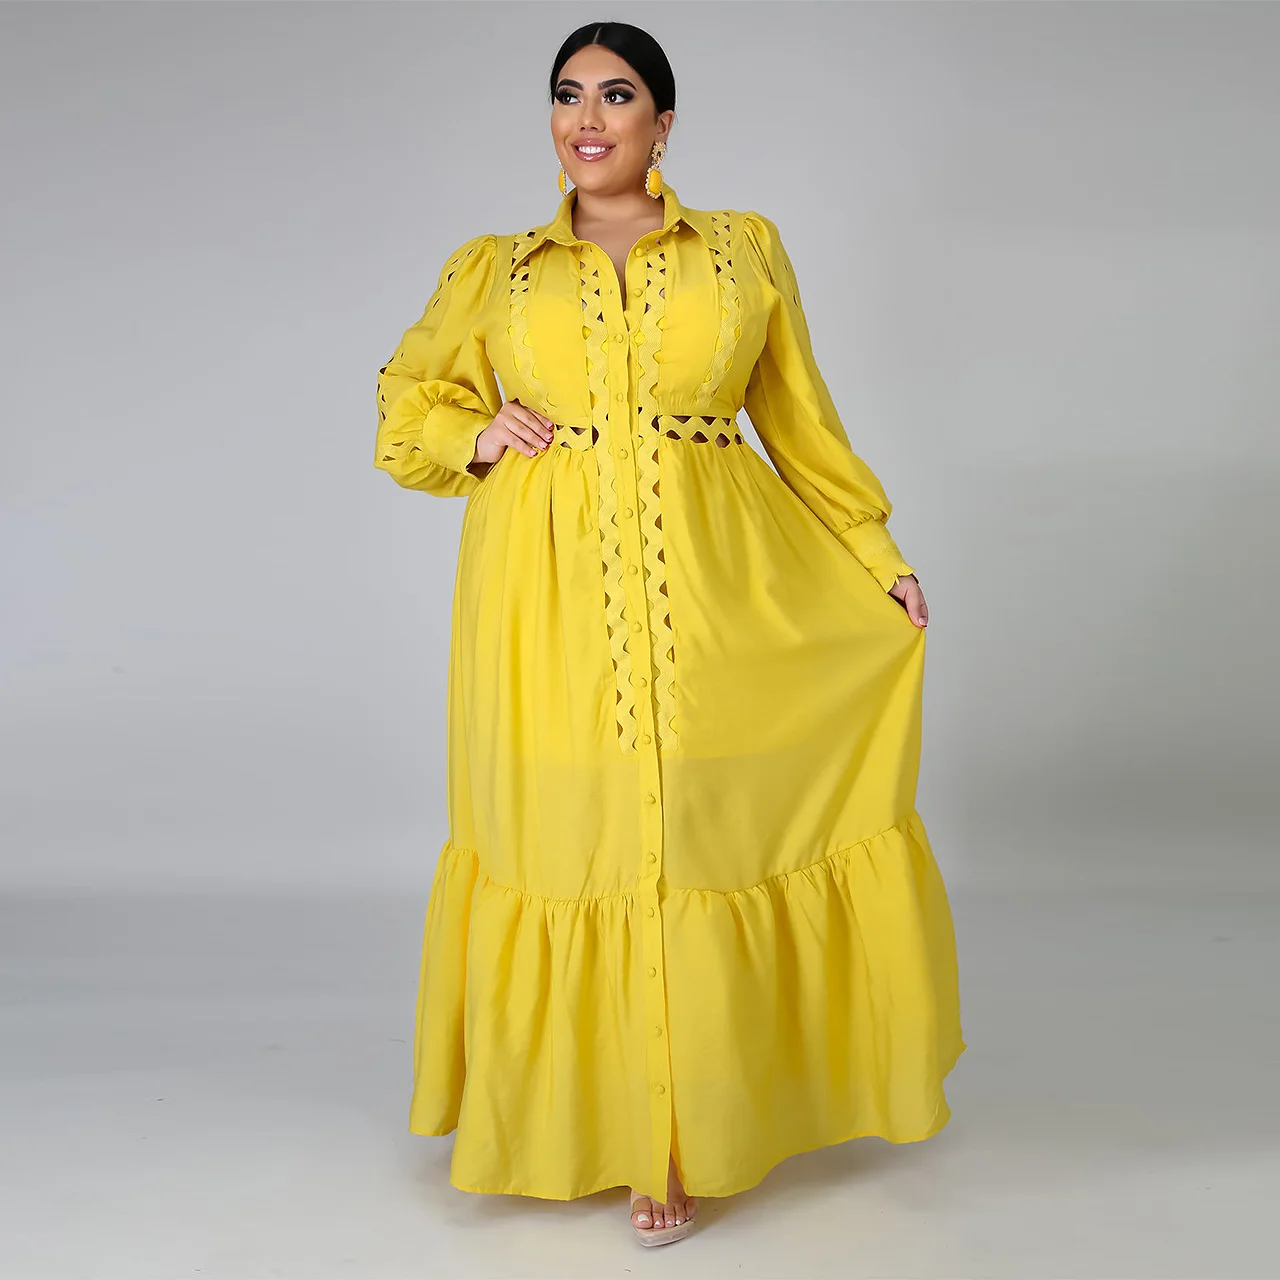 Foma Clothing YF1260 plus size XL-5XL Autumn 2020 women's solid color big skirt with high waist closing suit collar fall dress